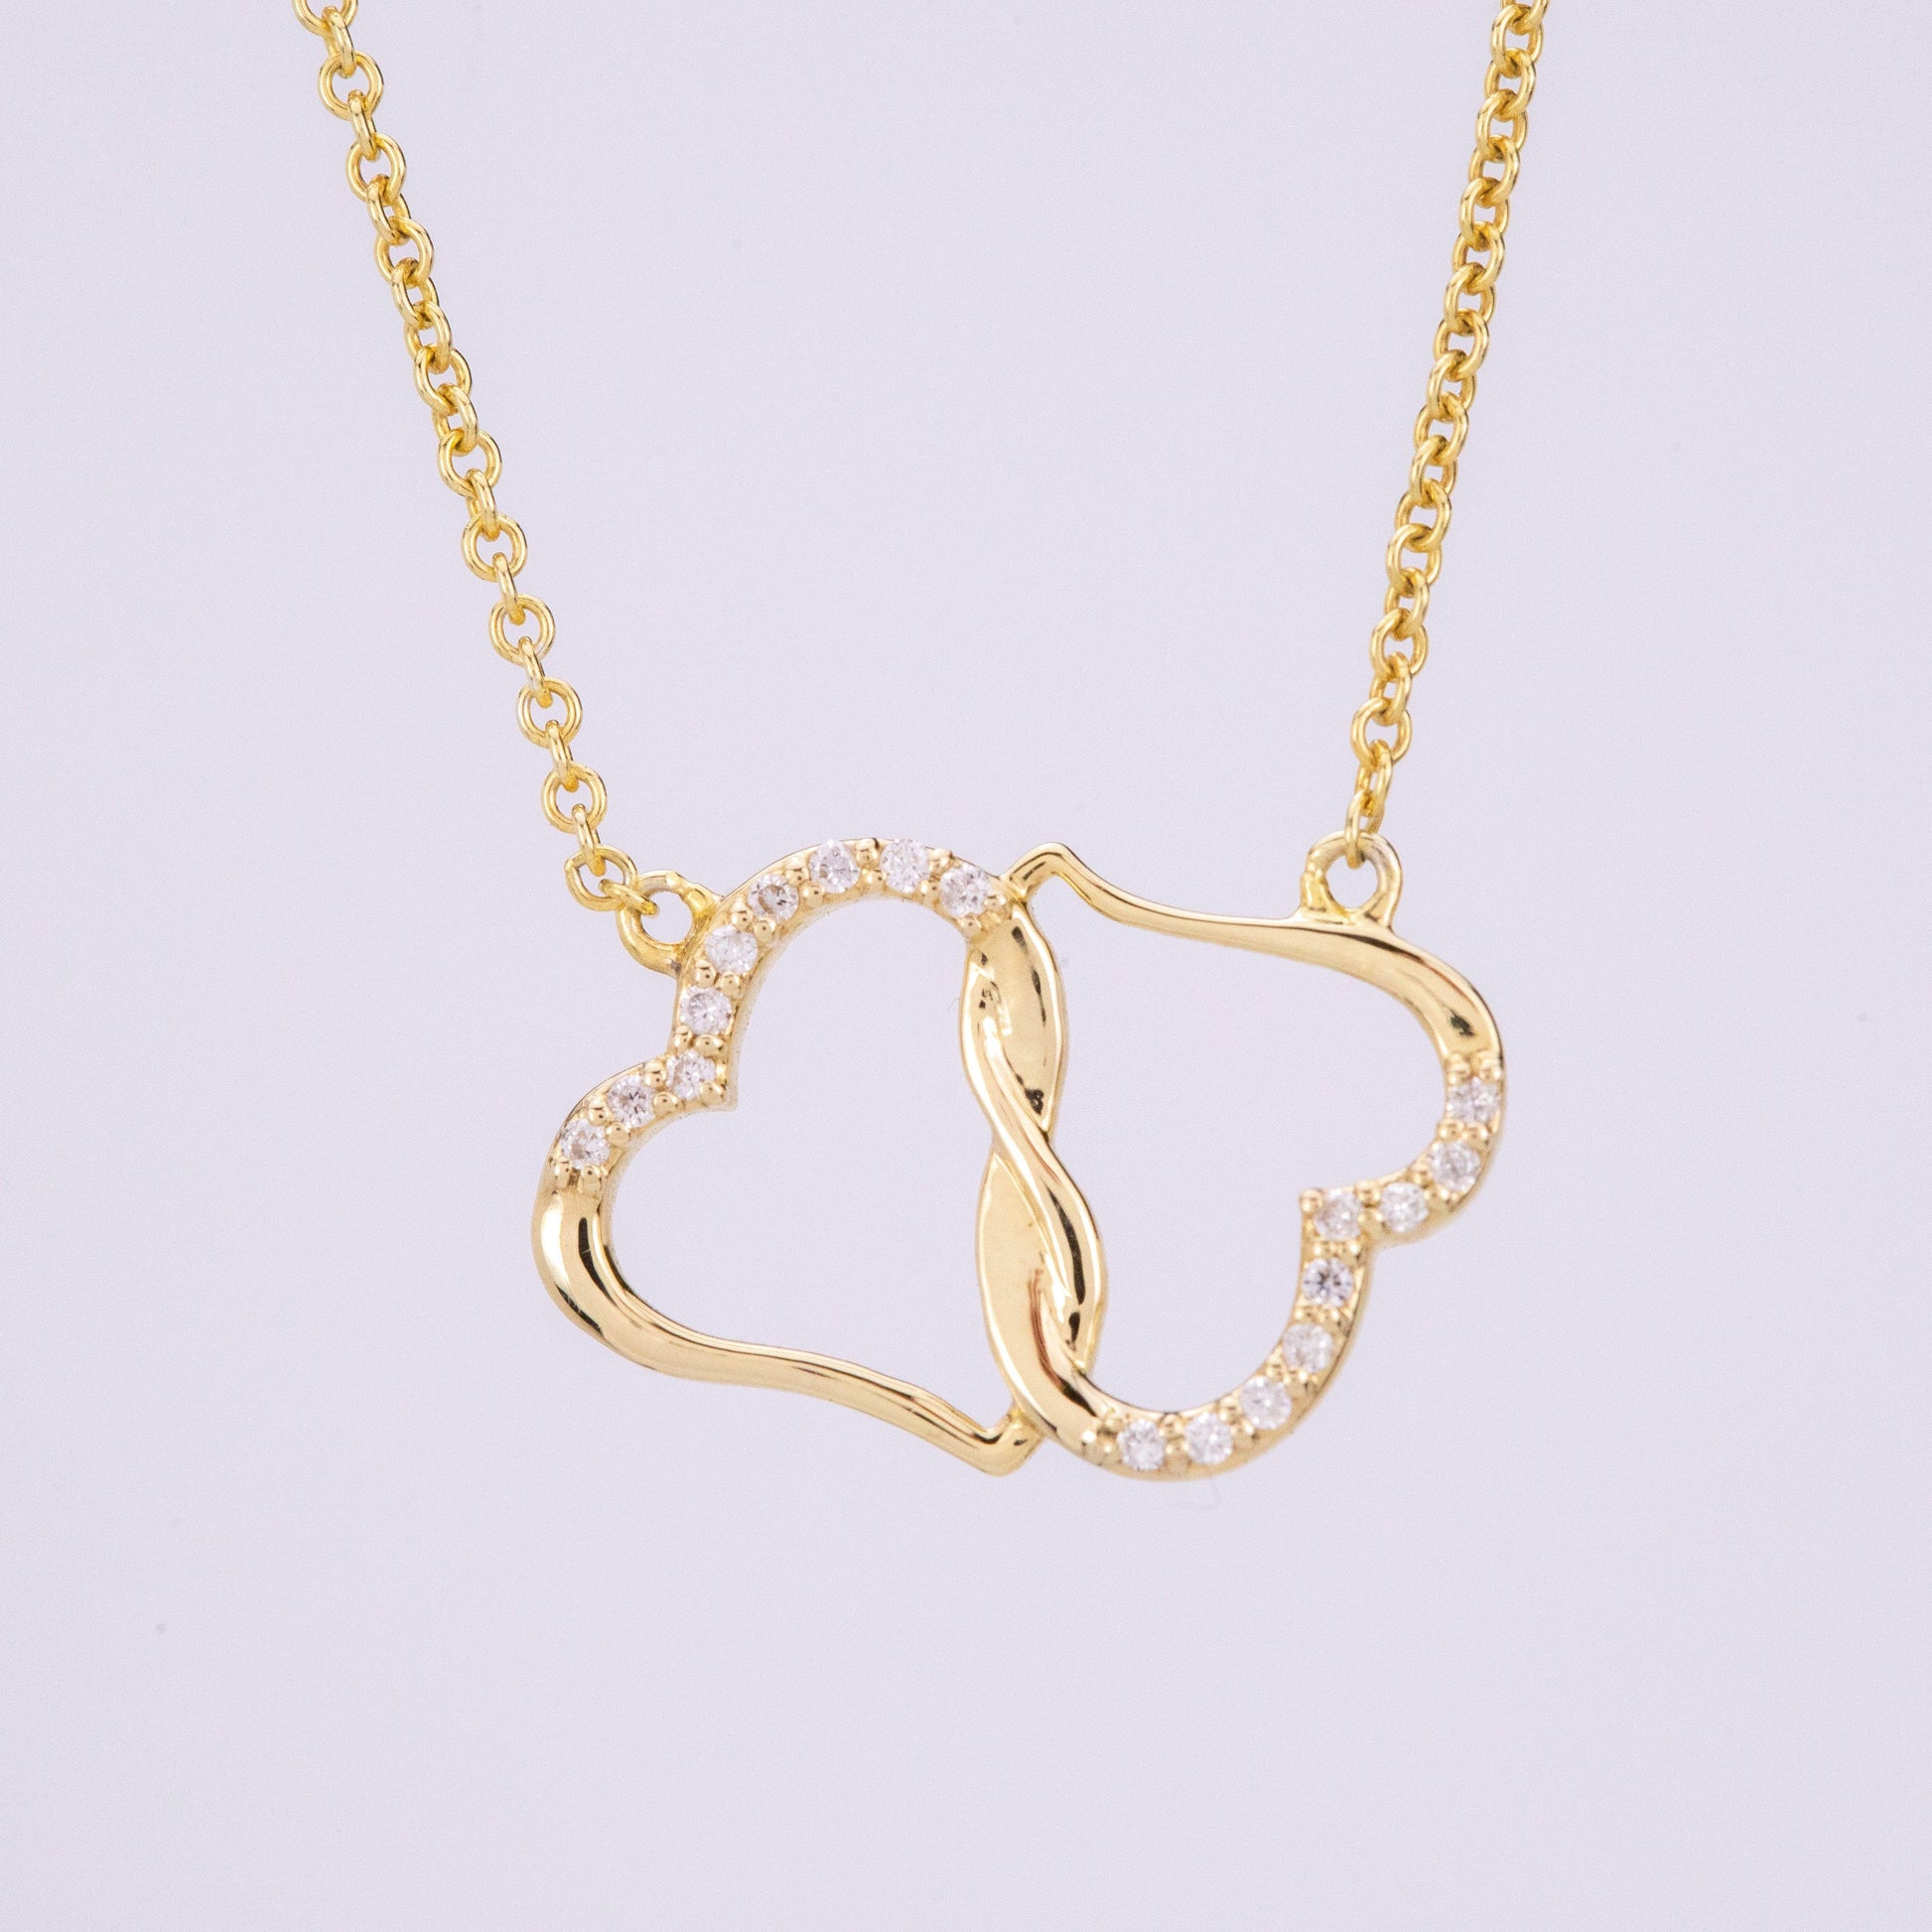 Jewelry gifts (Future Wife) Last Everything - Solid Gold with Diamonds Necklace - Belesmé - Memorable Jewelry Gifts